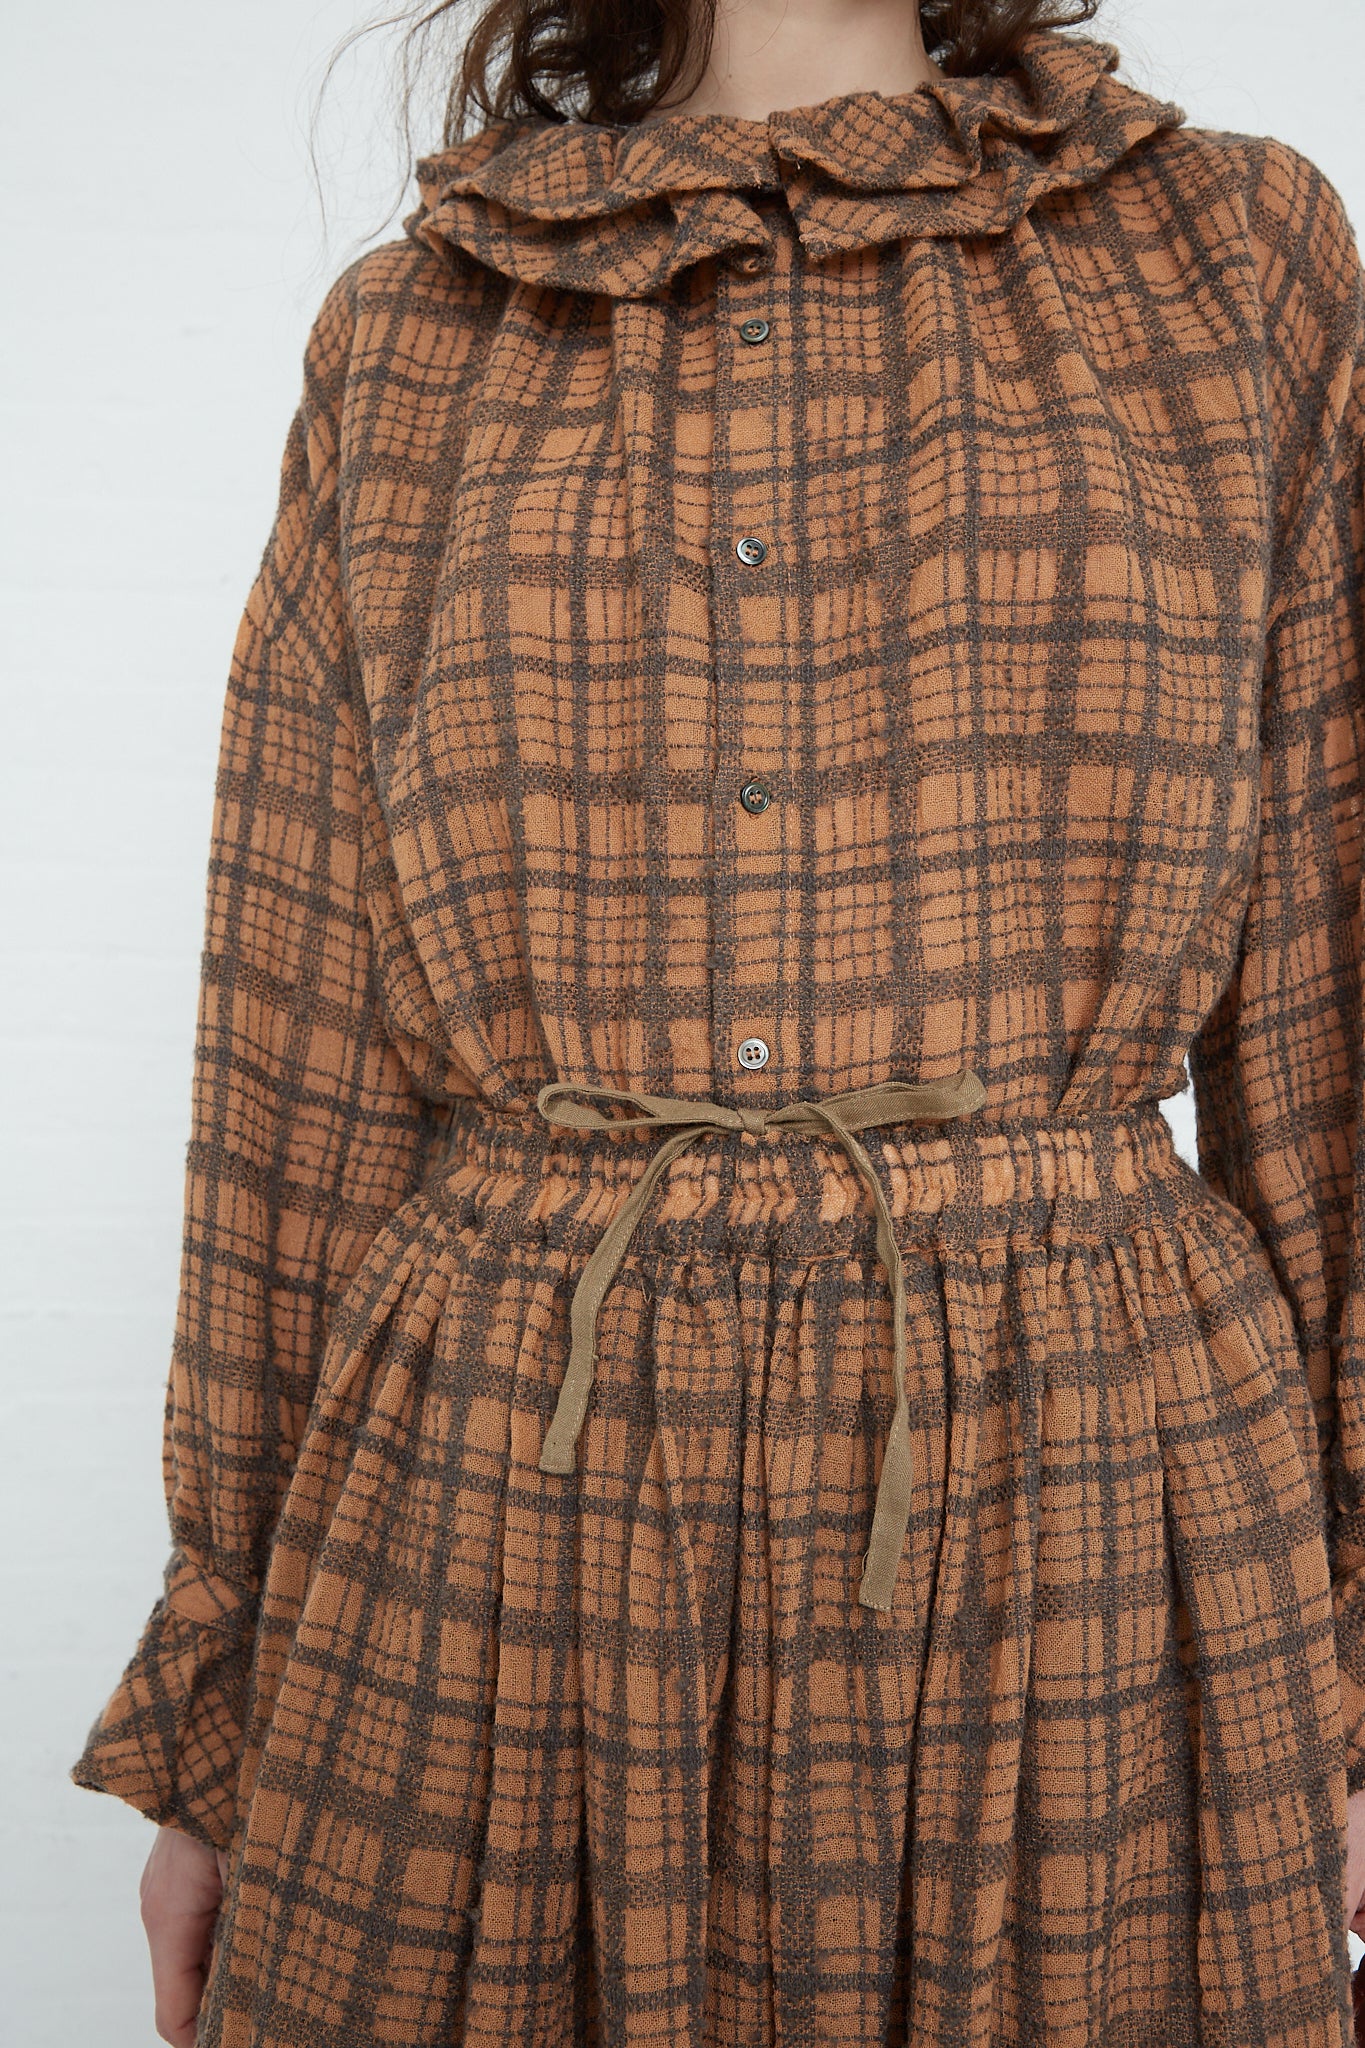 A woman wearing a Woven Wool Check Skirt in Terracotta by Ichi Antiquités.